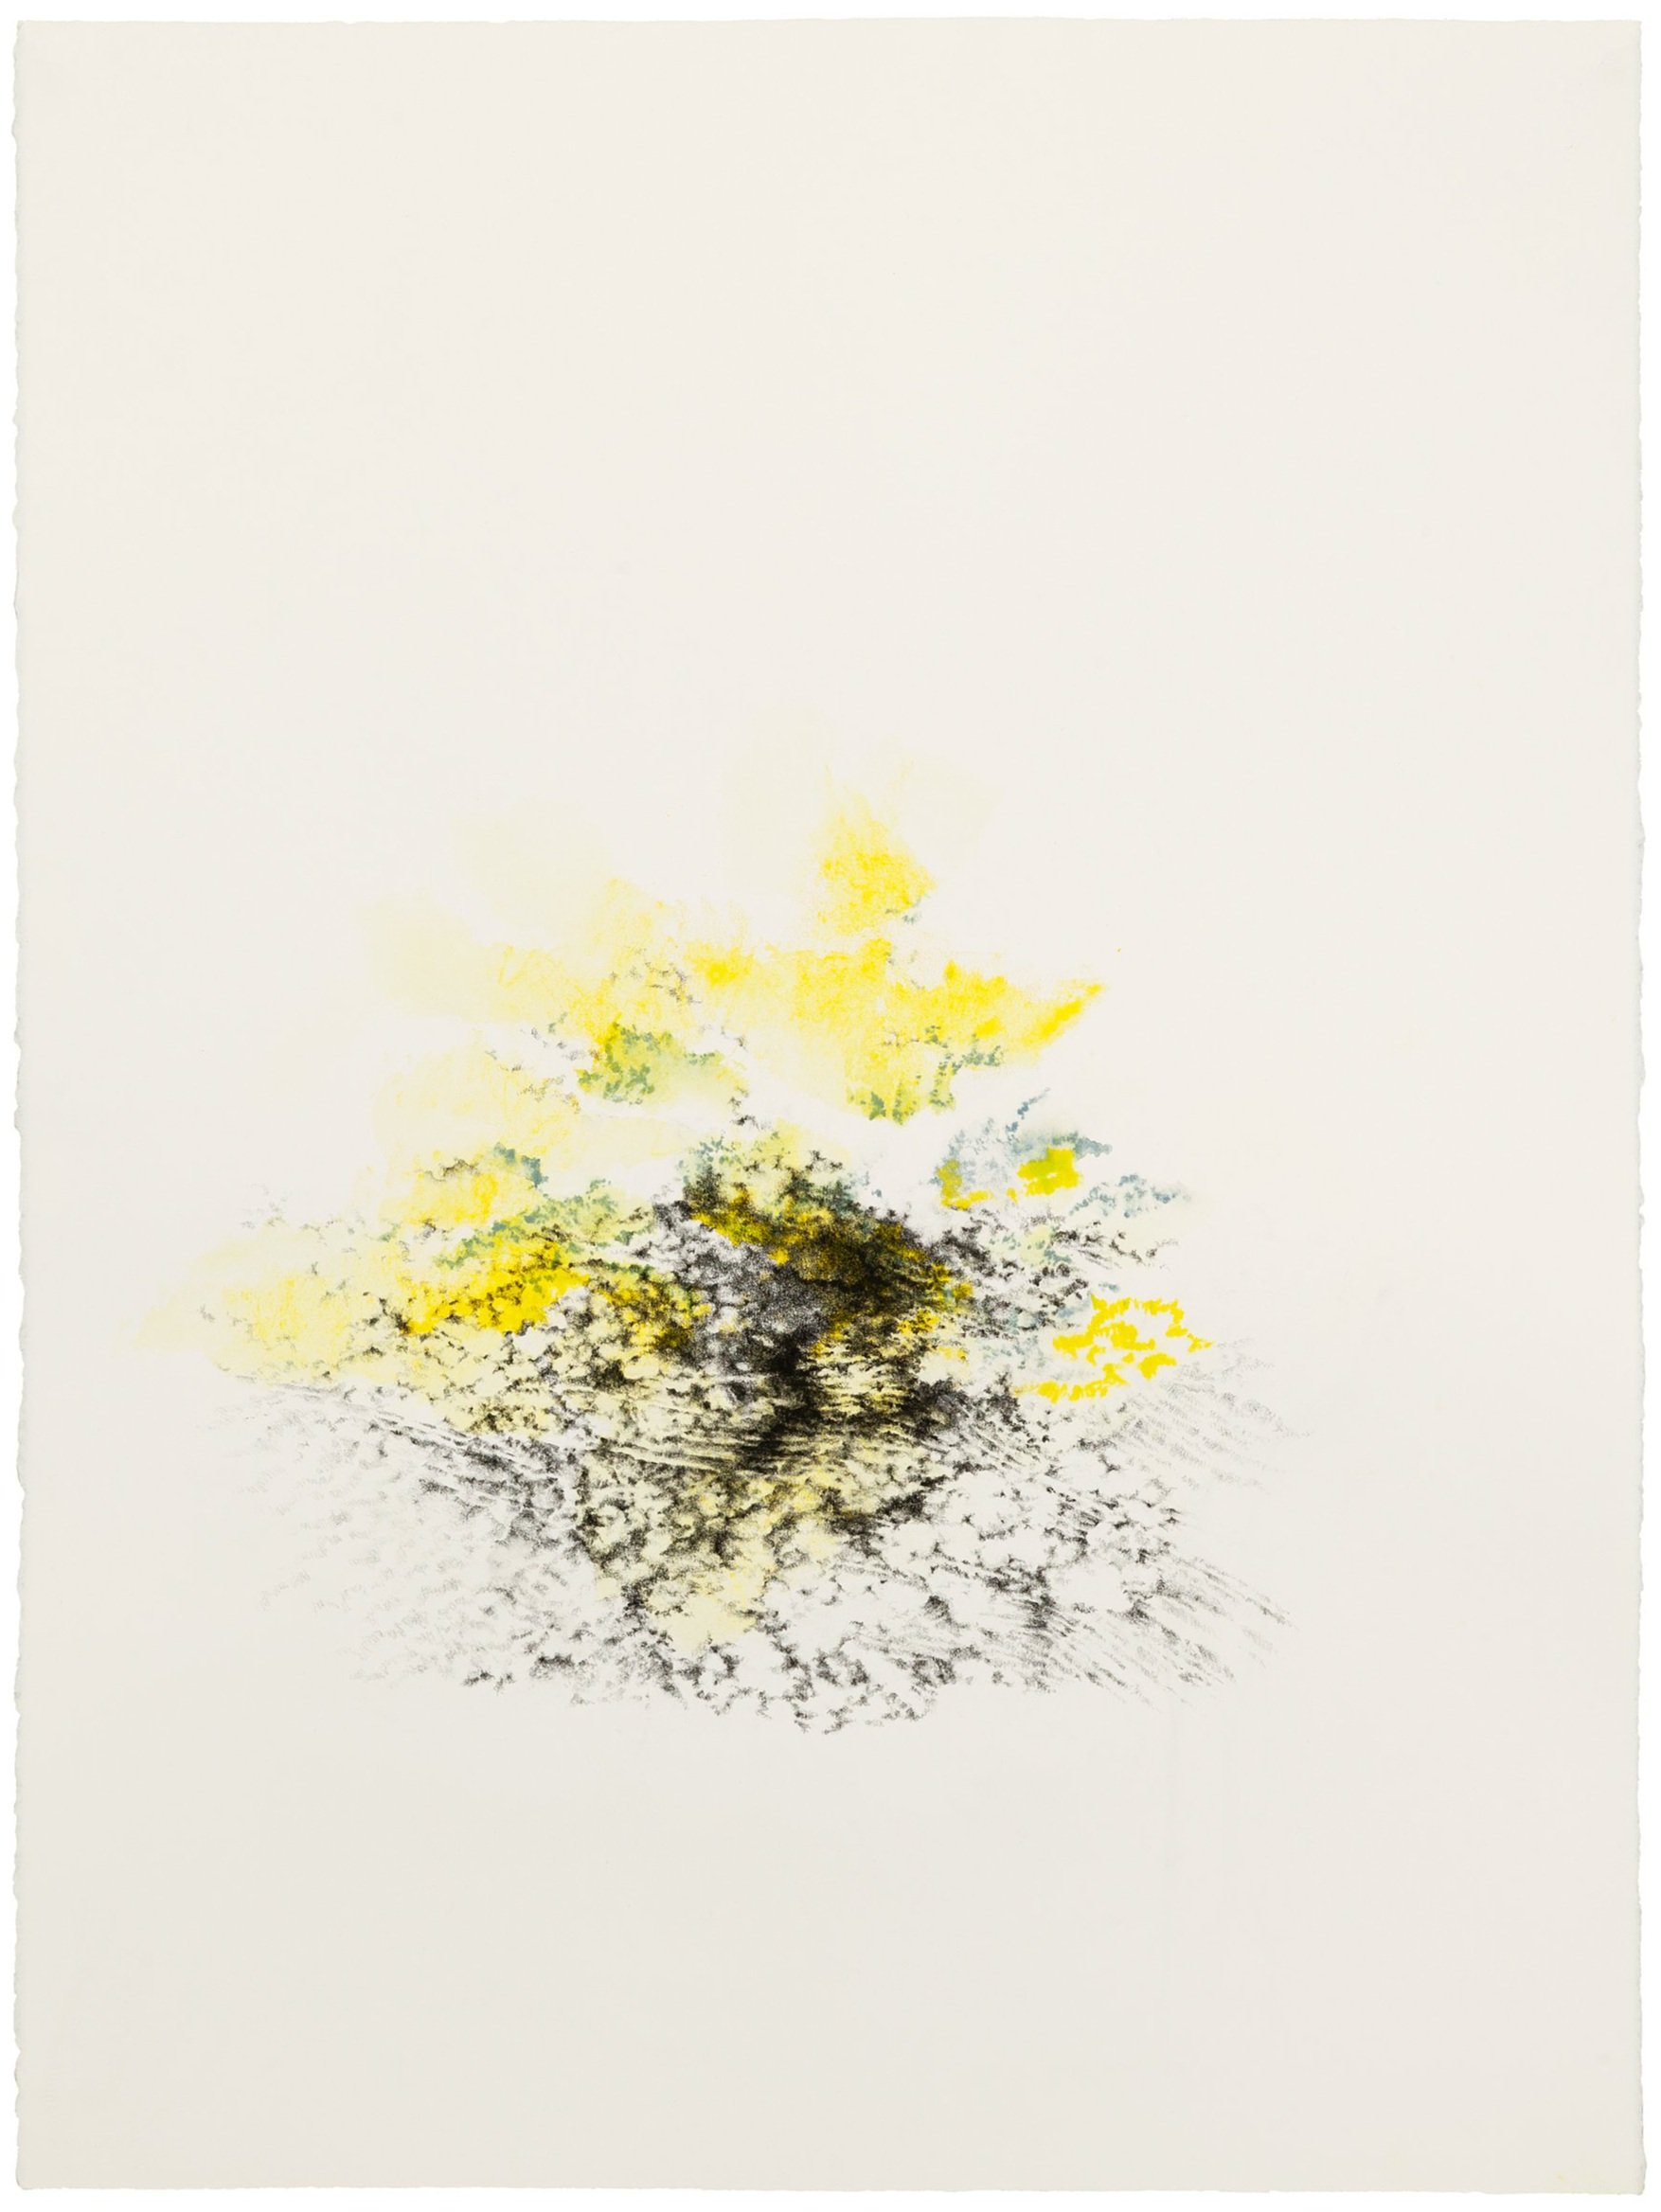   Christine Bourdette   Fumarole 5 , 2020 graphite and water-soluble colored pencil on paper 35.25 x 27.5" framed&nbsp;  INQUIRE&gt;  